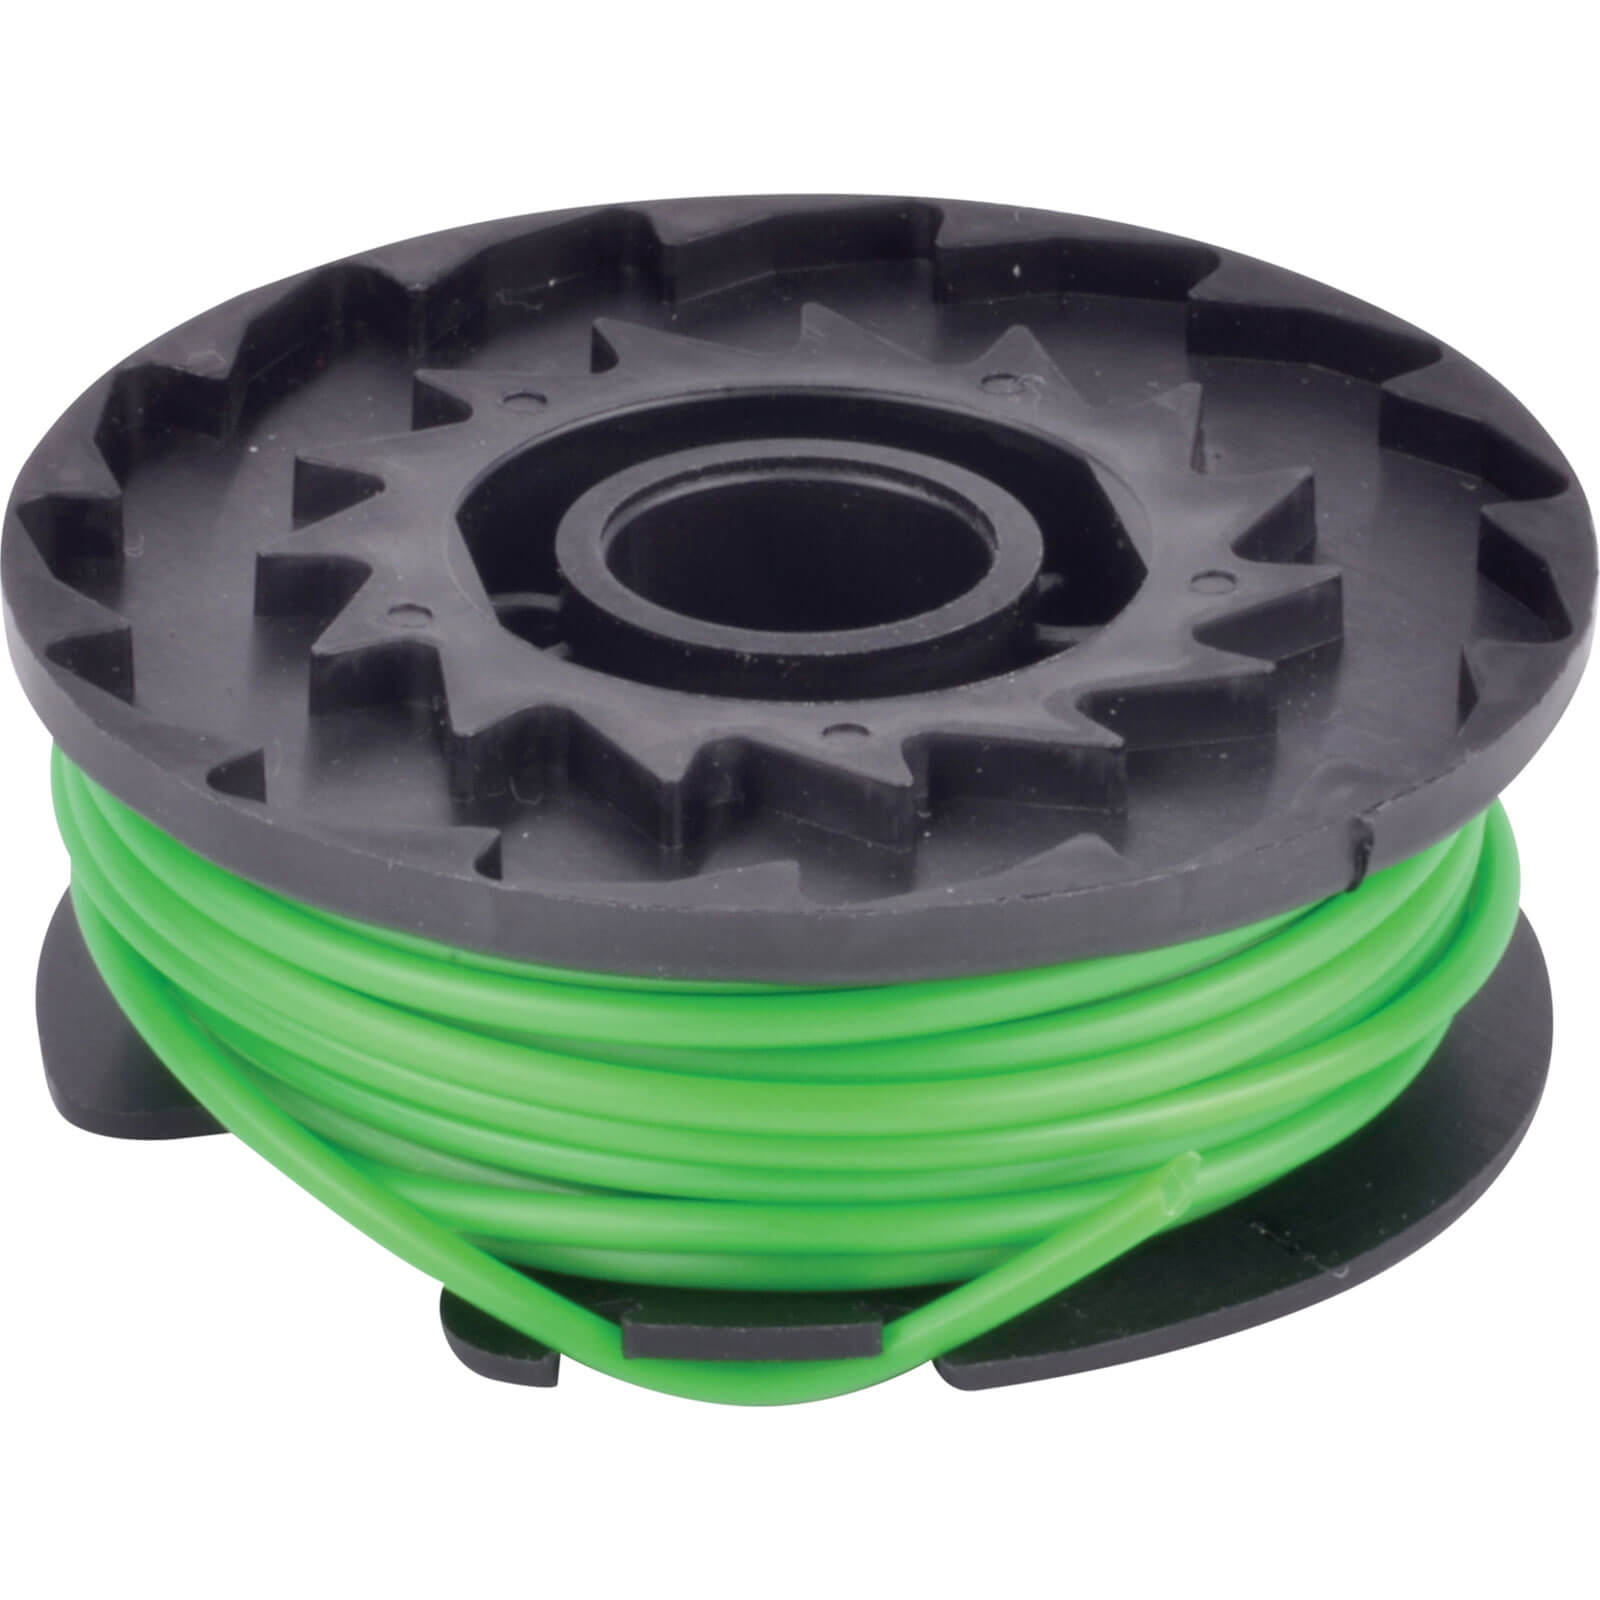 Image of ALM 2mm x 6m Spool and Line for Worx WG168 Grass Trimmer Pack of 1